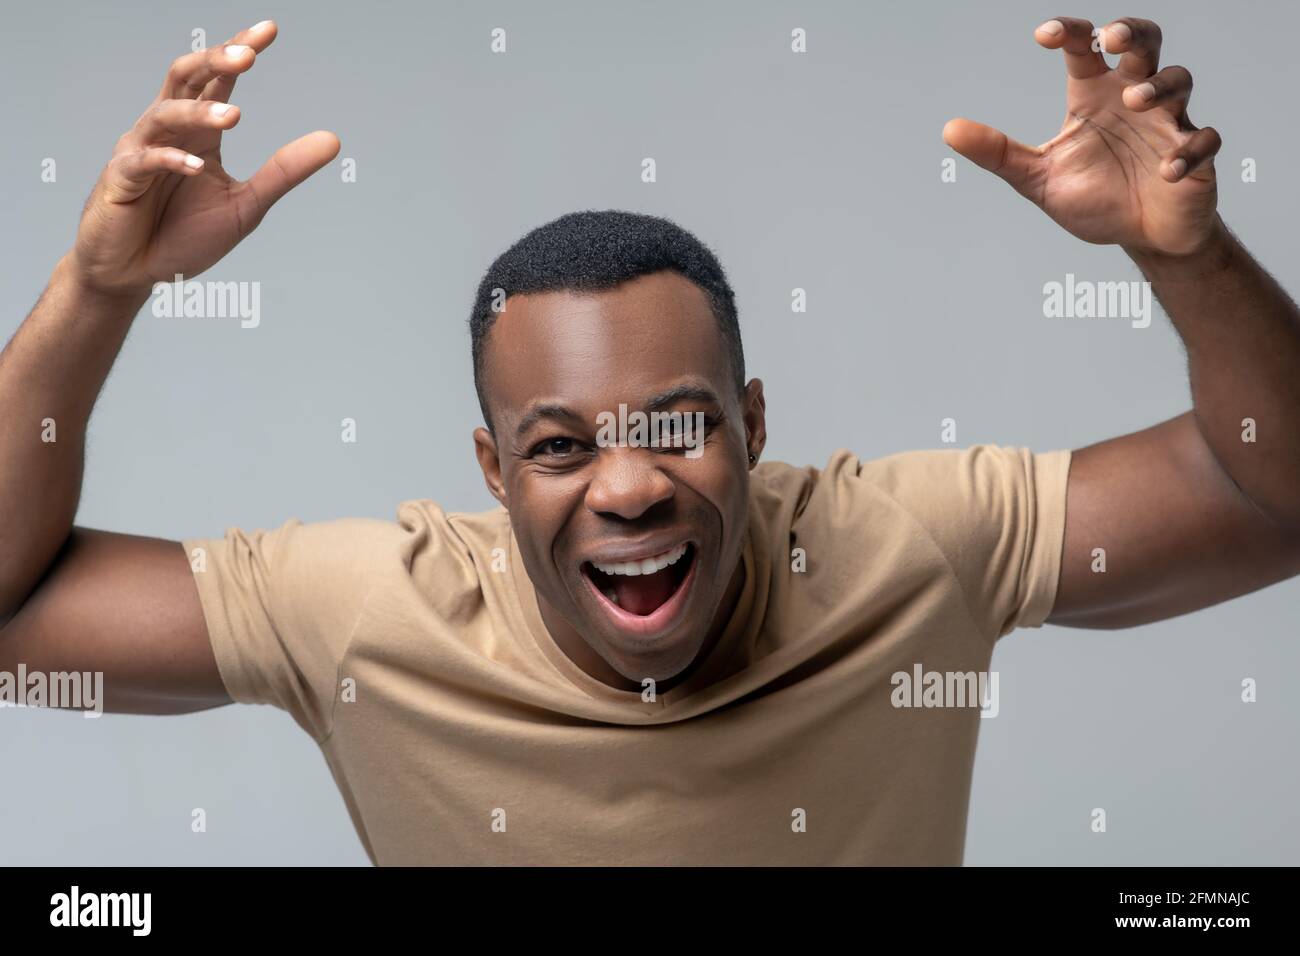 Cheerful man with open mouth and raised hands Stock Photo